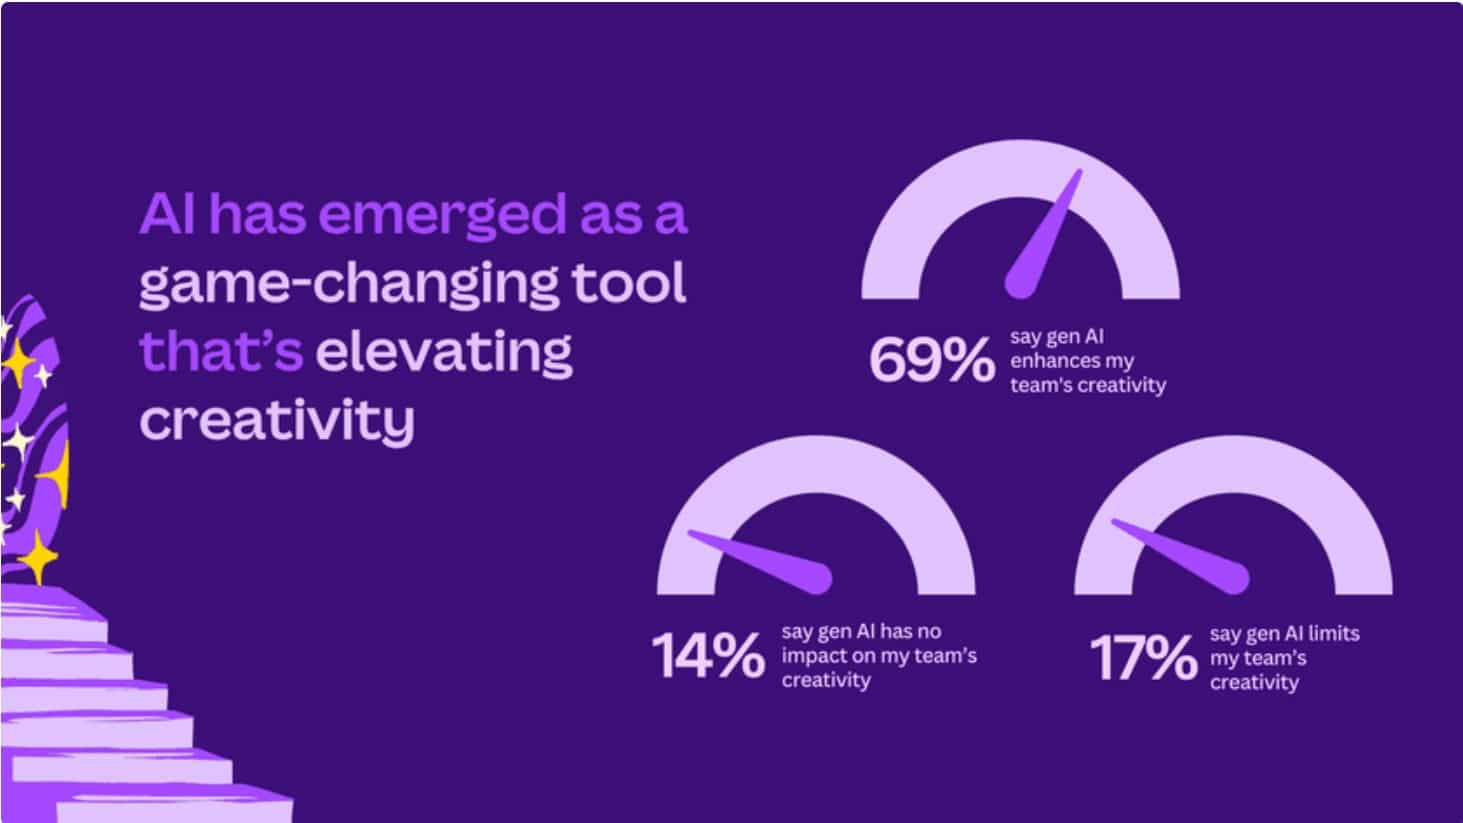 AI’s creativity impact: Large majority of marketing and creative leaders say generative AI is an essential part of their creative toolkit